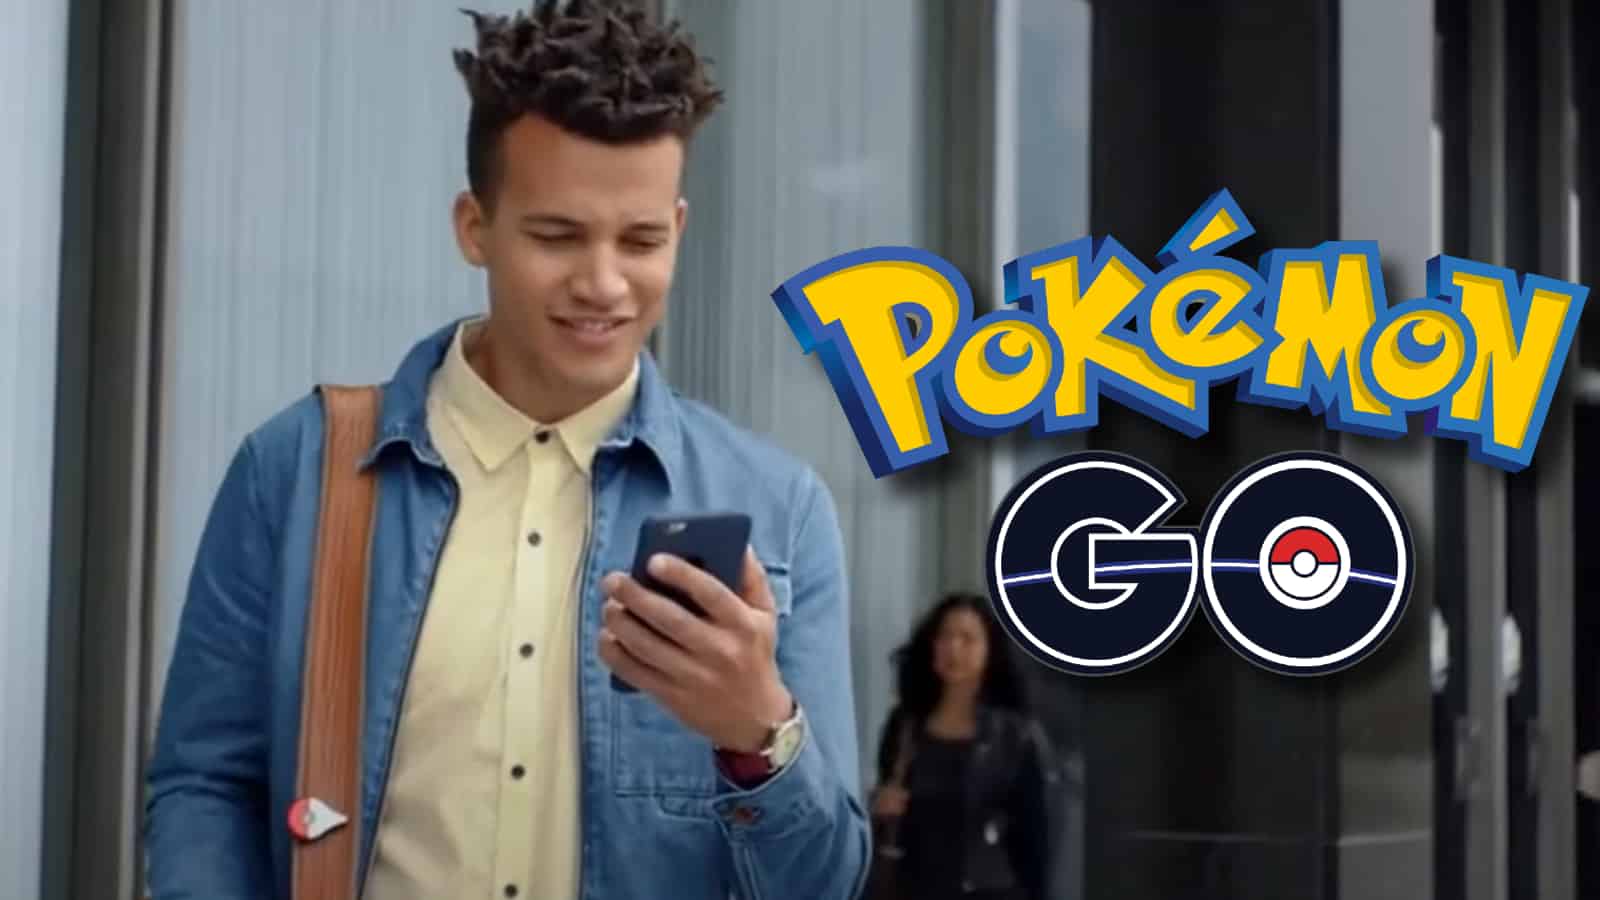 man standing with phone in hand in Pokemon Go advertisement